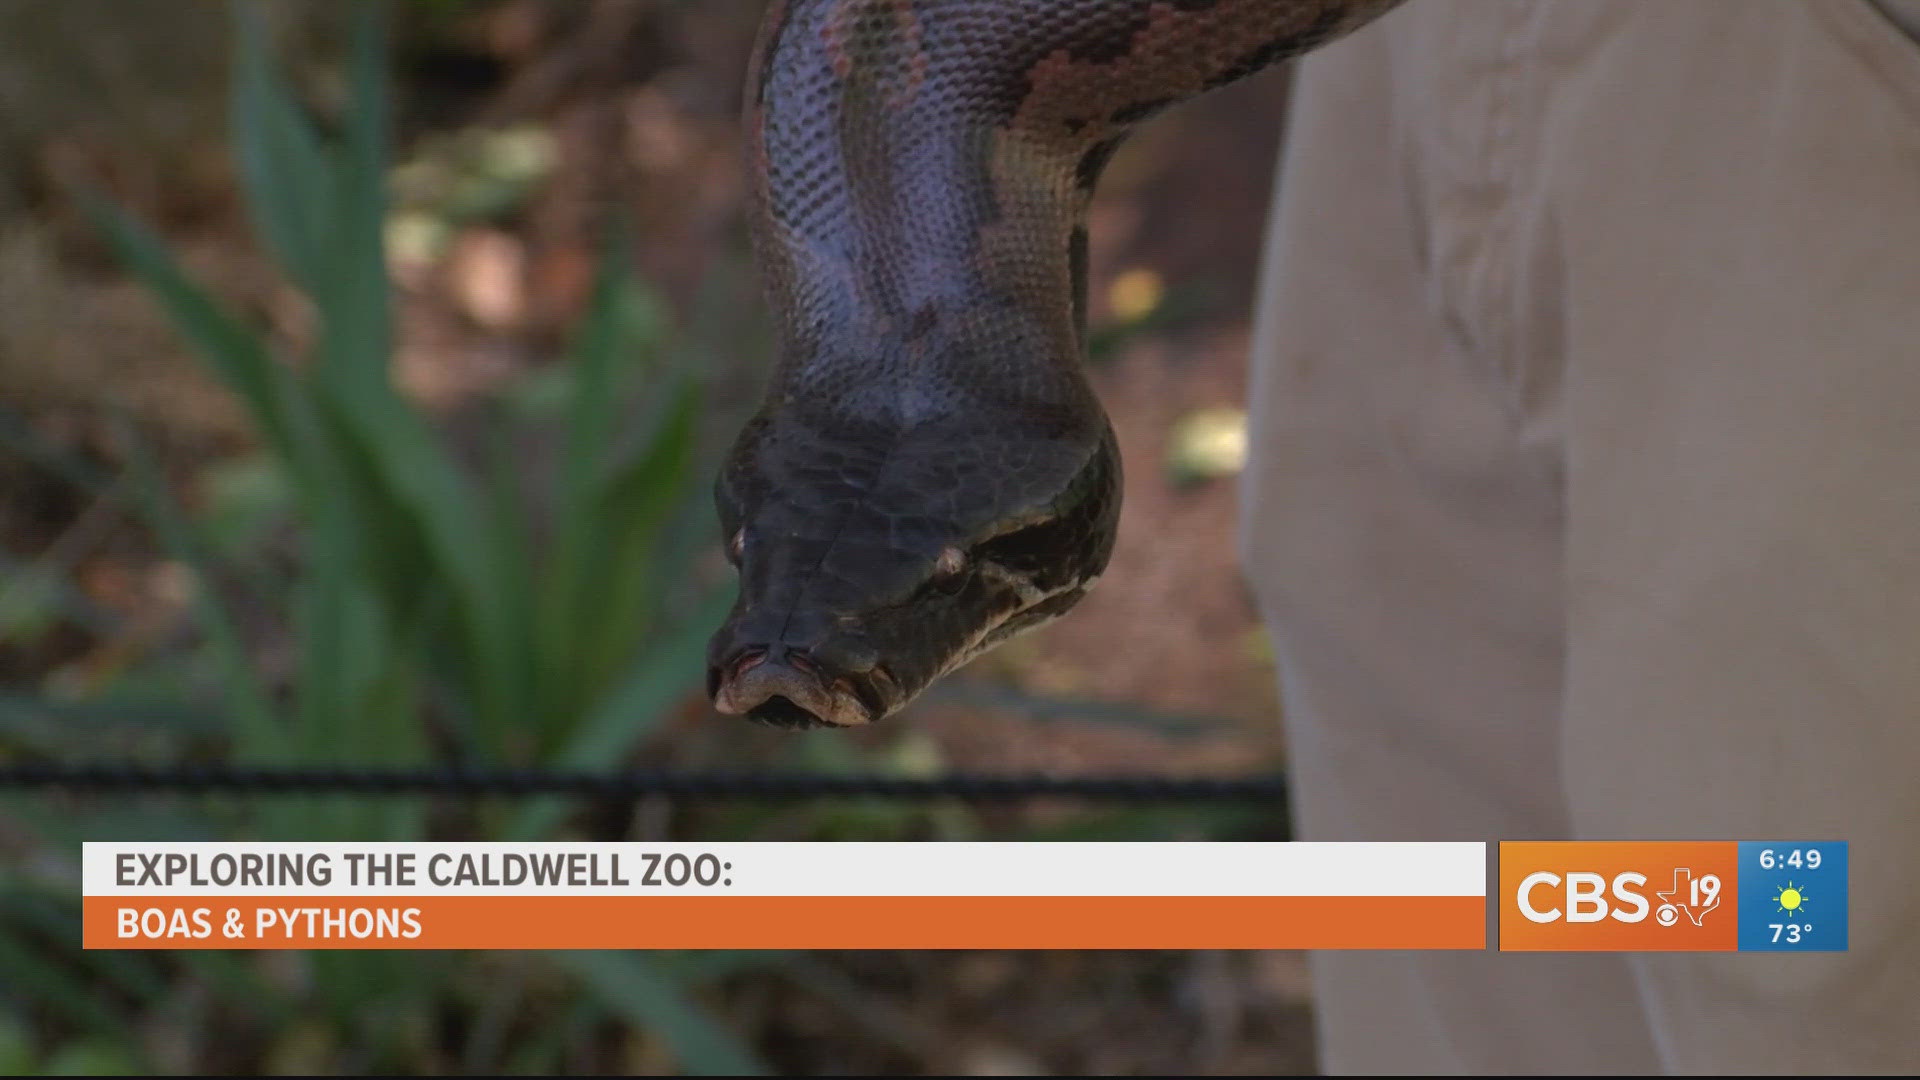 For more behind-the-scenes zoo content, watch CBS19 on Fridays during Morning Y'all for the weekly segment, Exploring the Caldwell Zoo